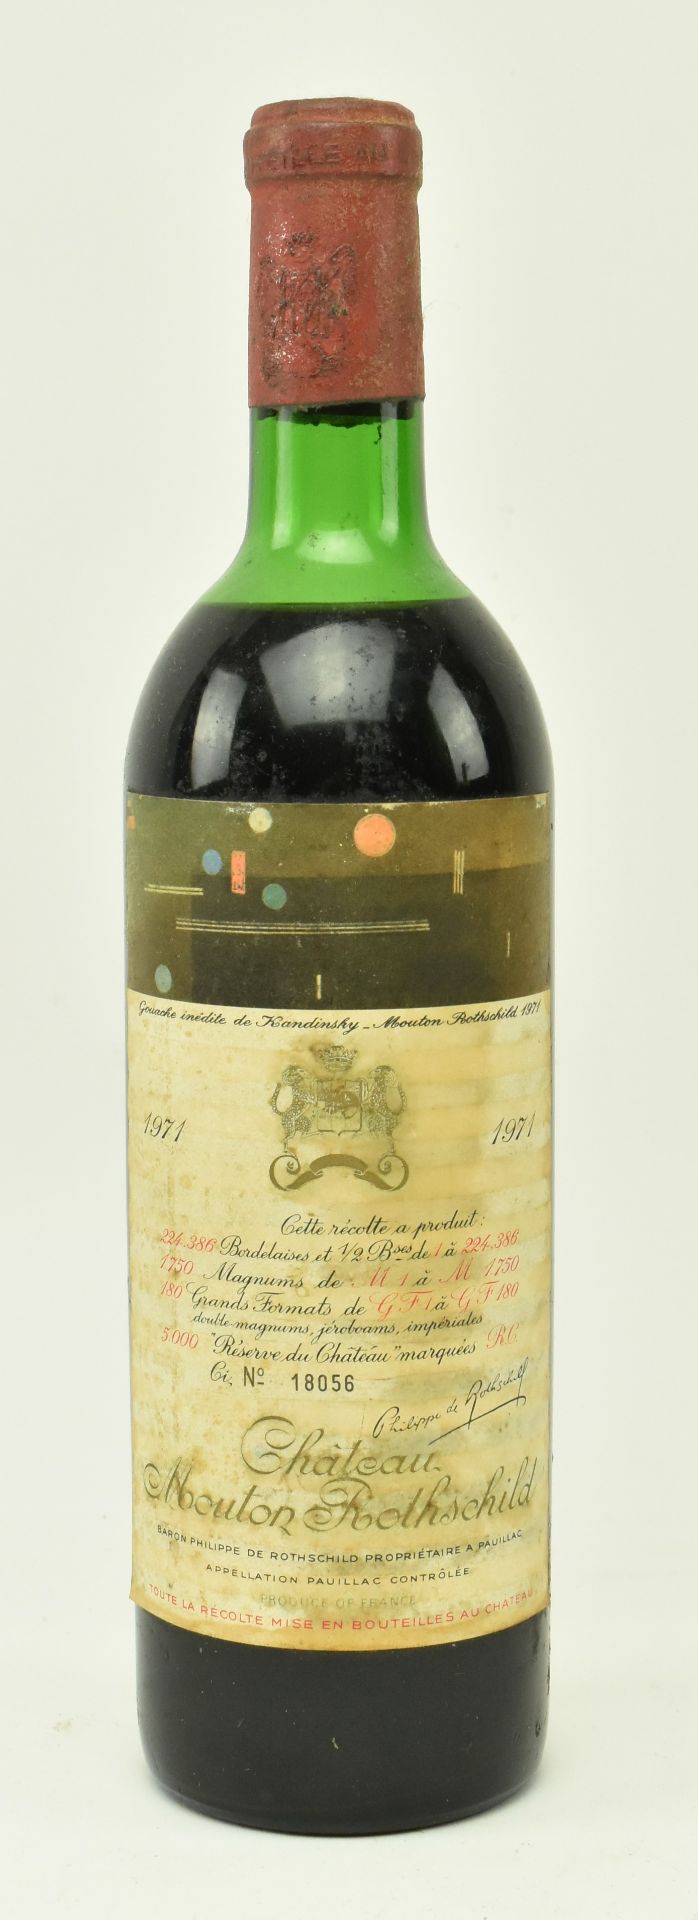 SINGLE BOTTLE OF 1971 CHATEAU ROTHSCHILD RED WINE